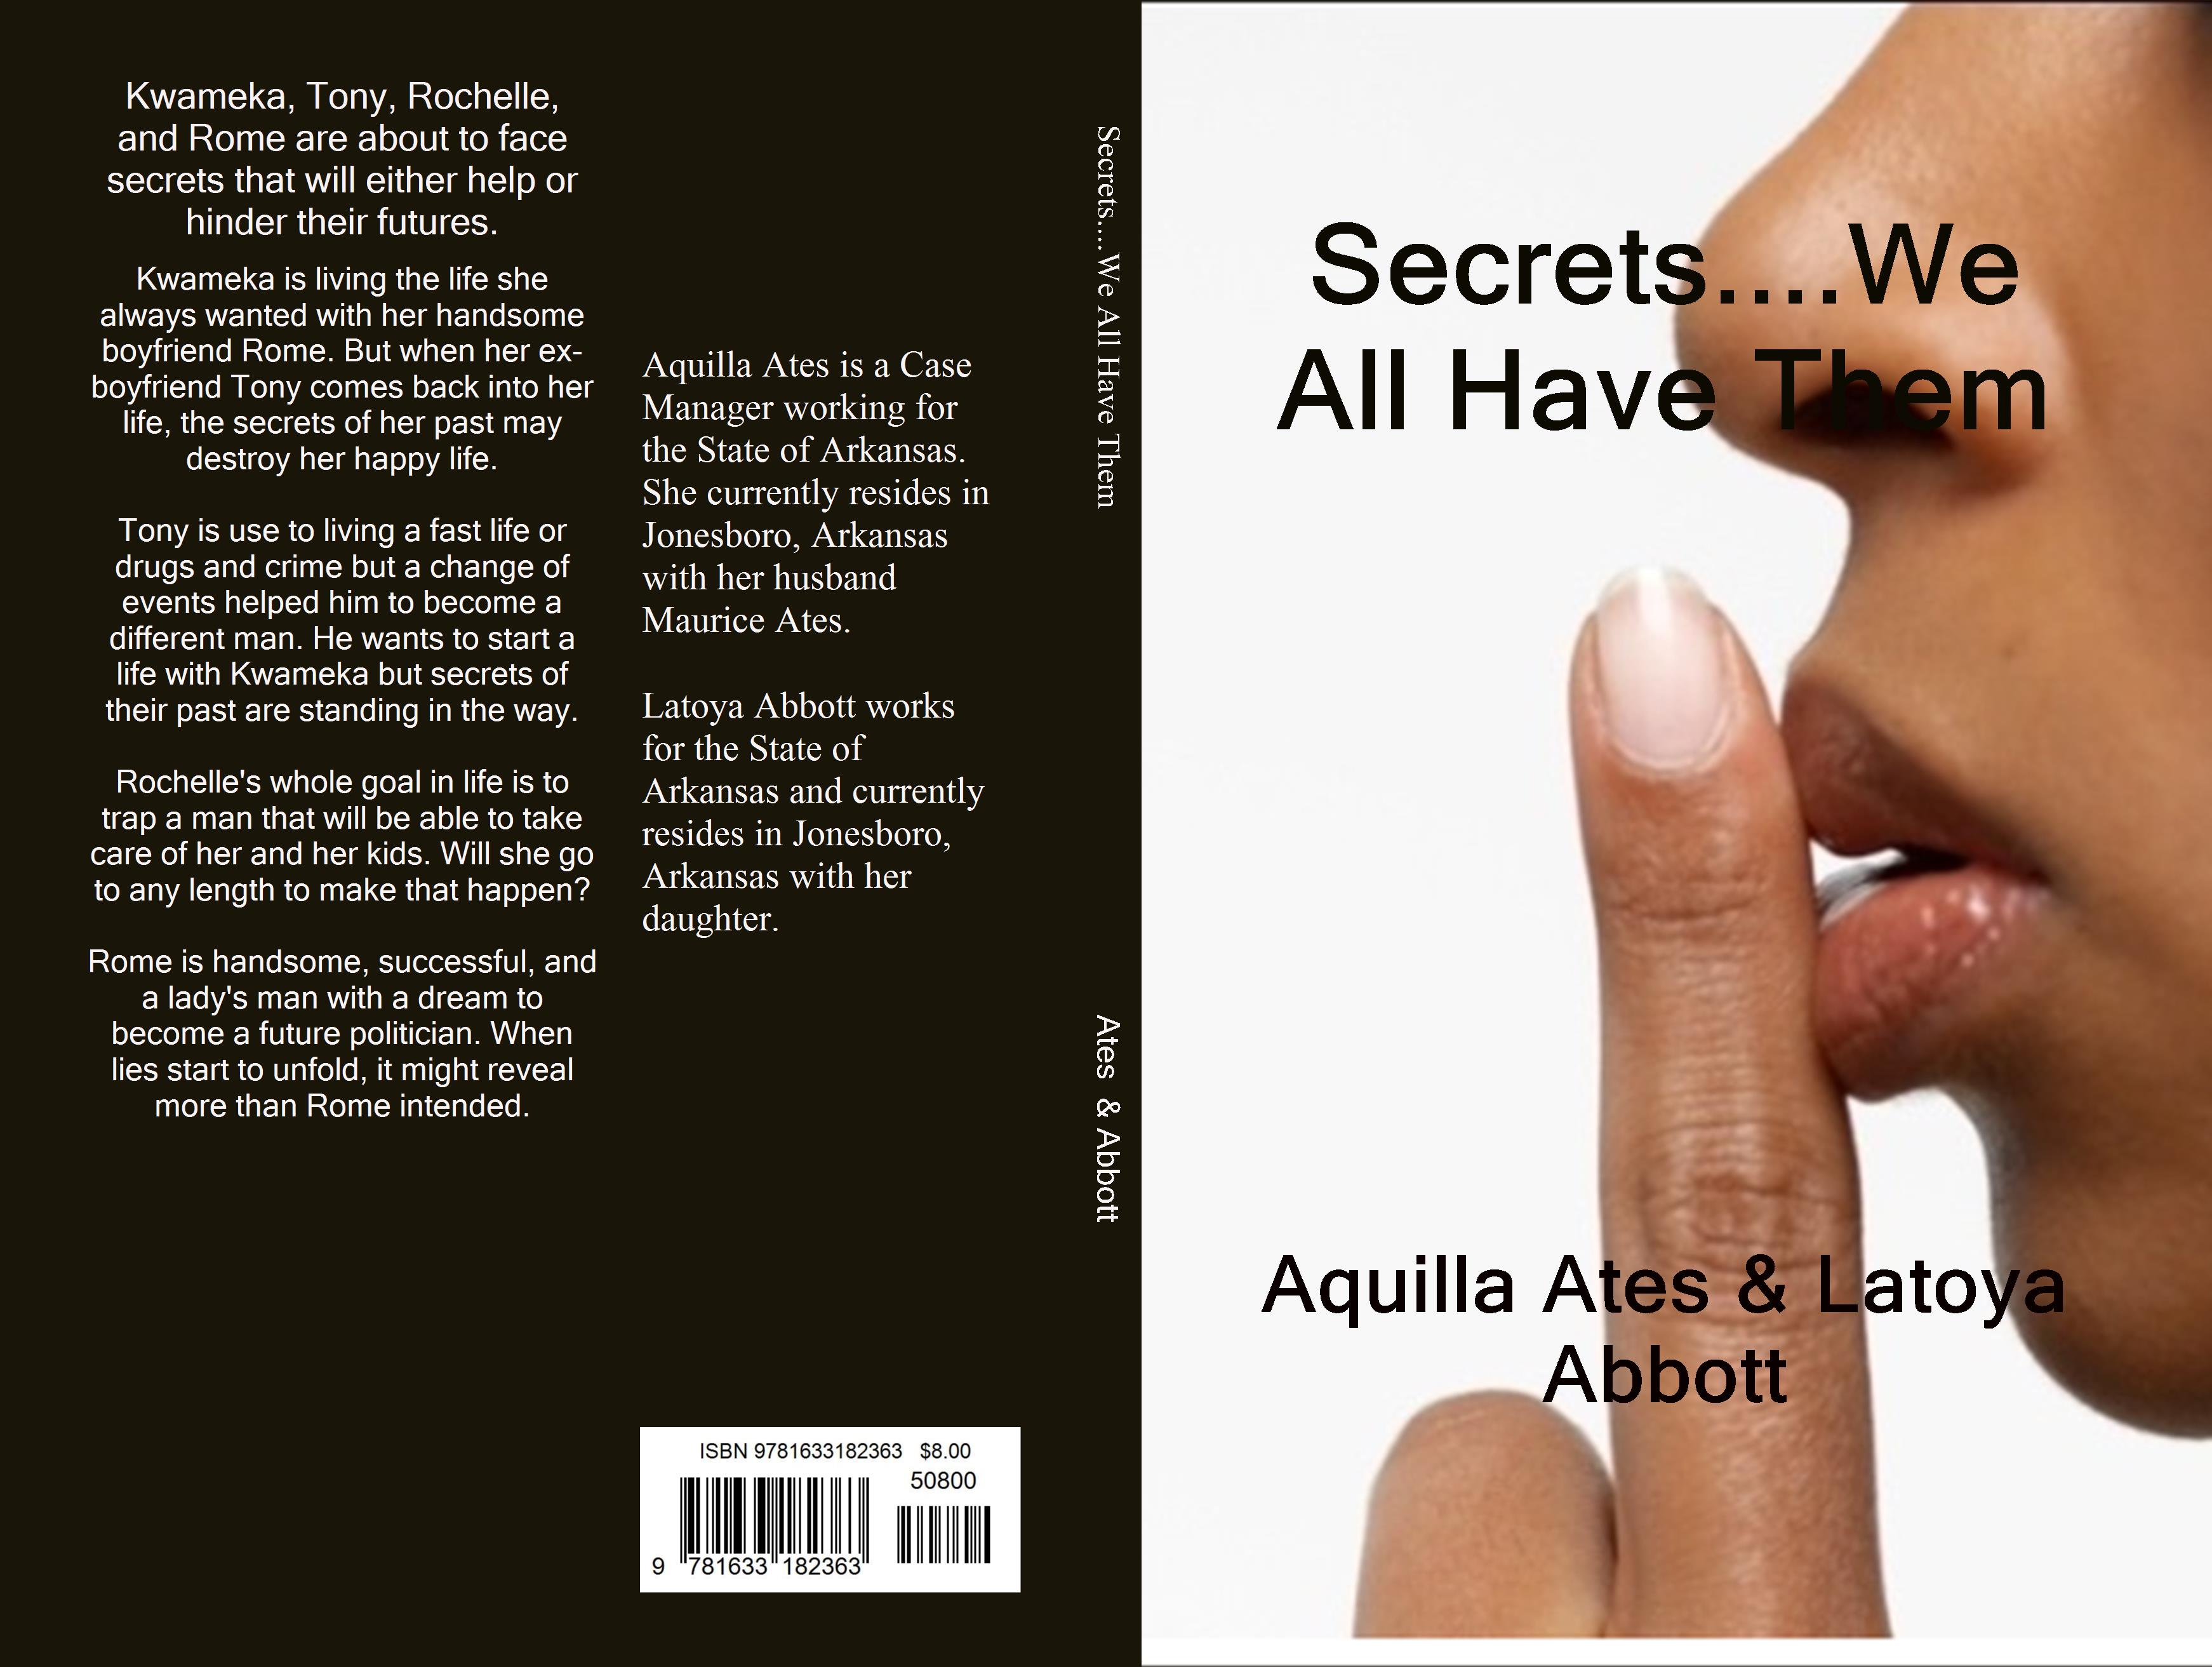 Secrets....We All Have Them cover image